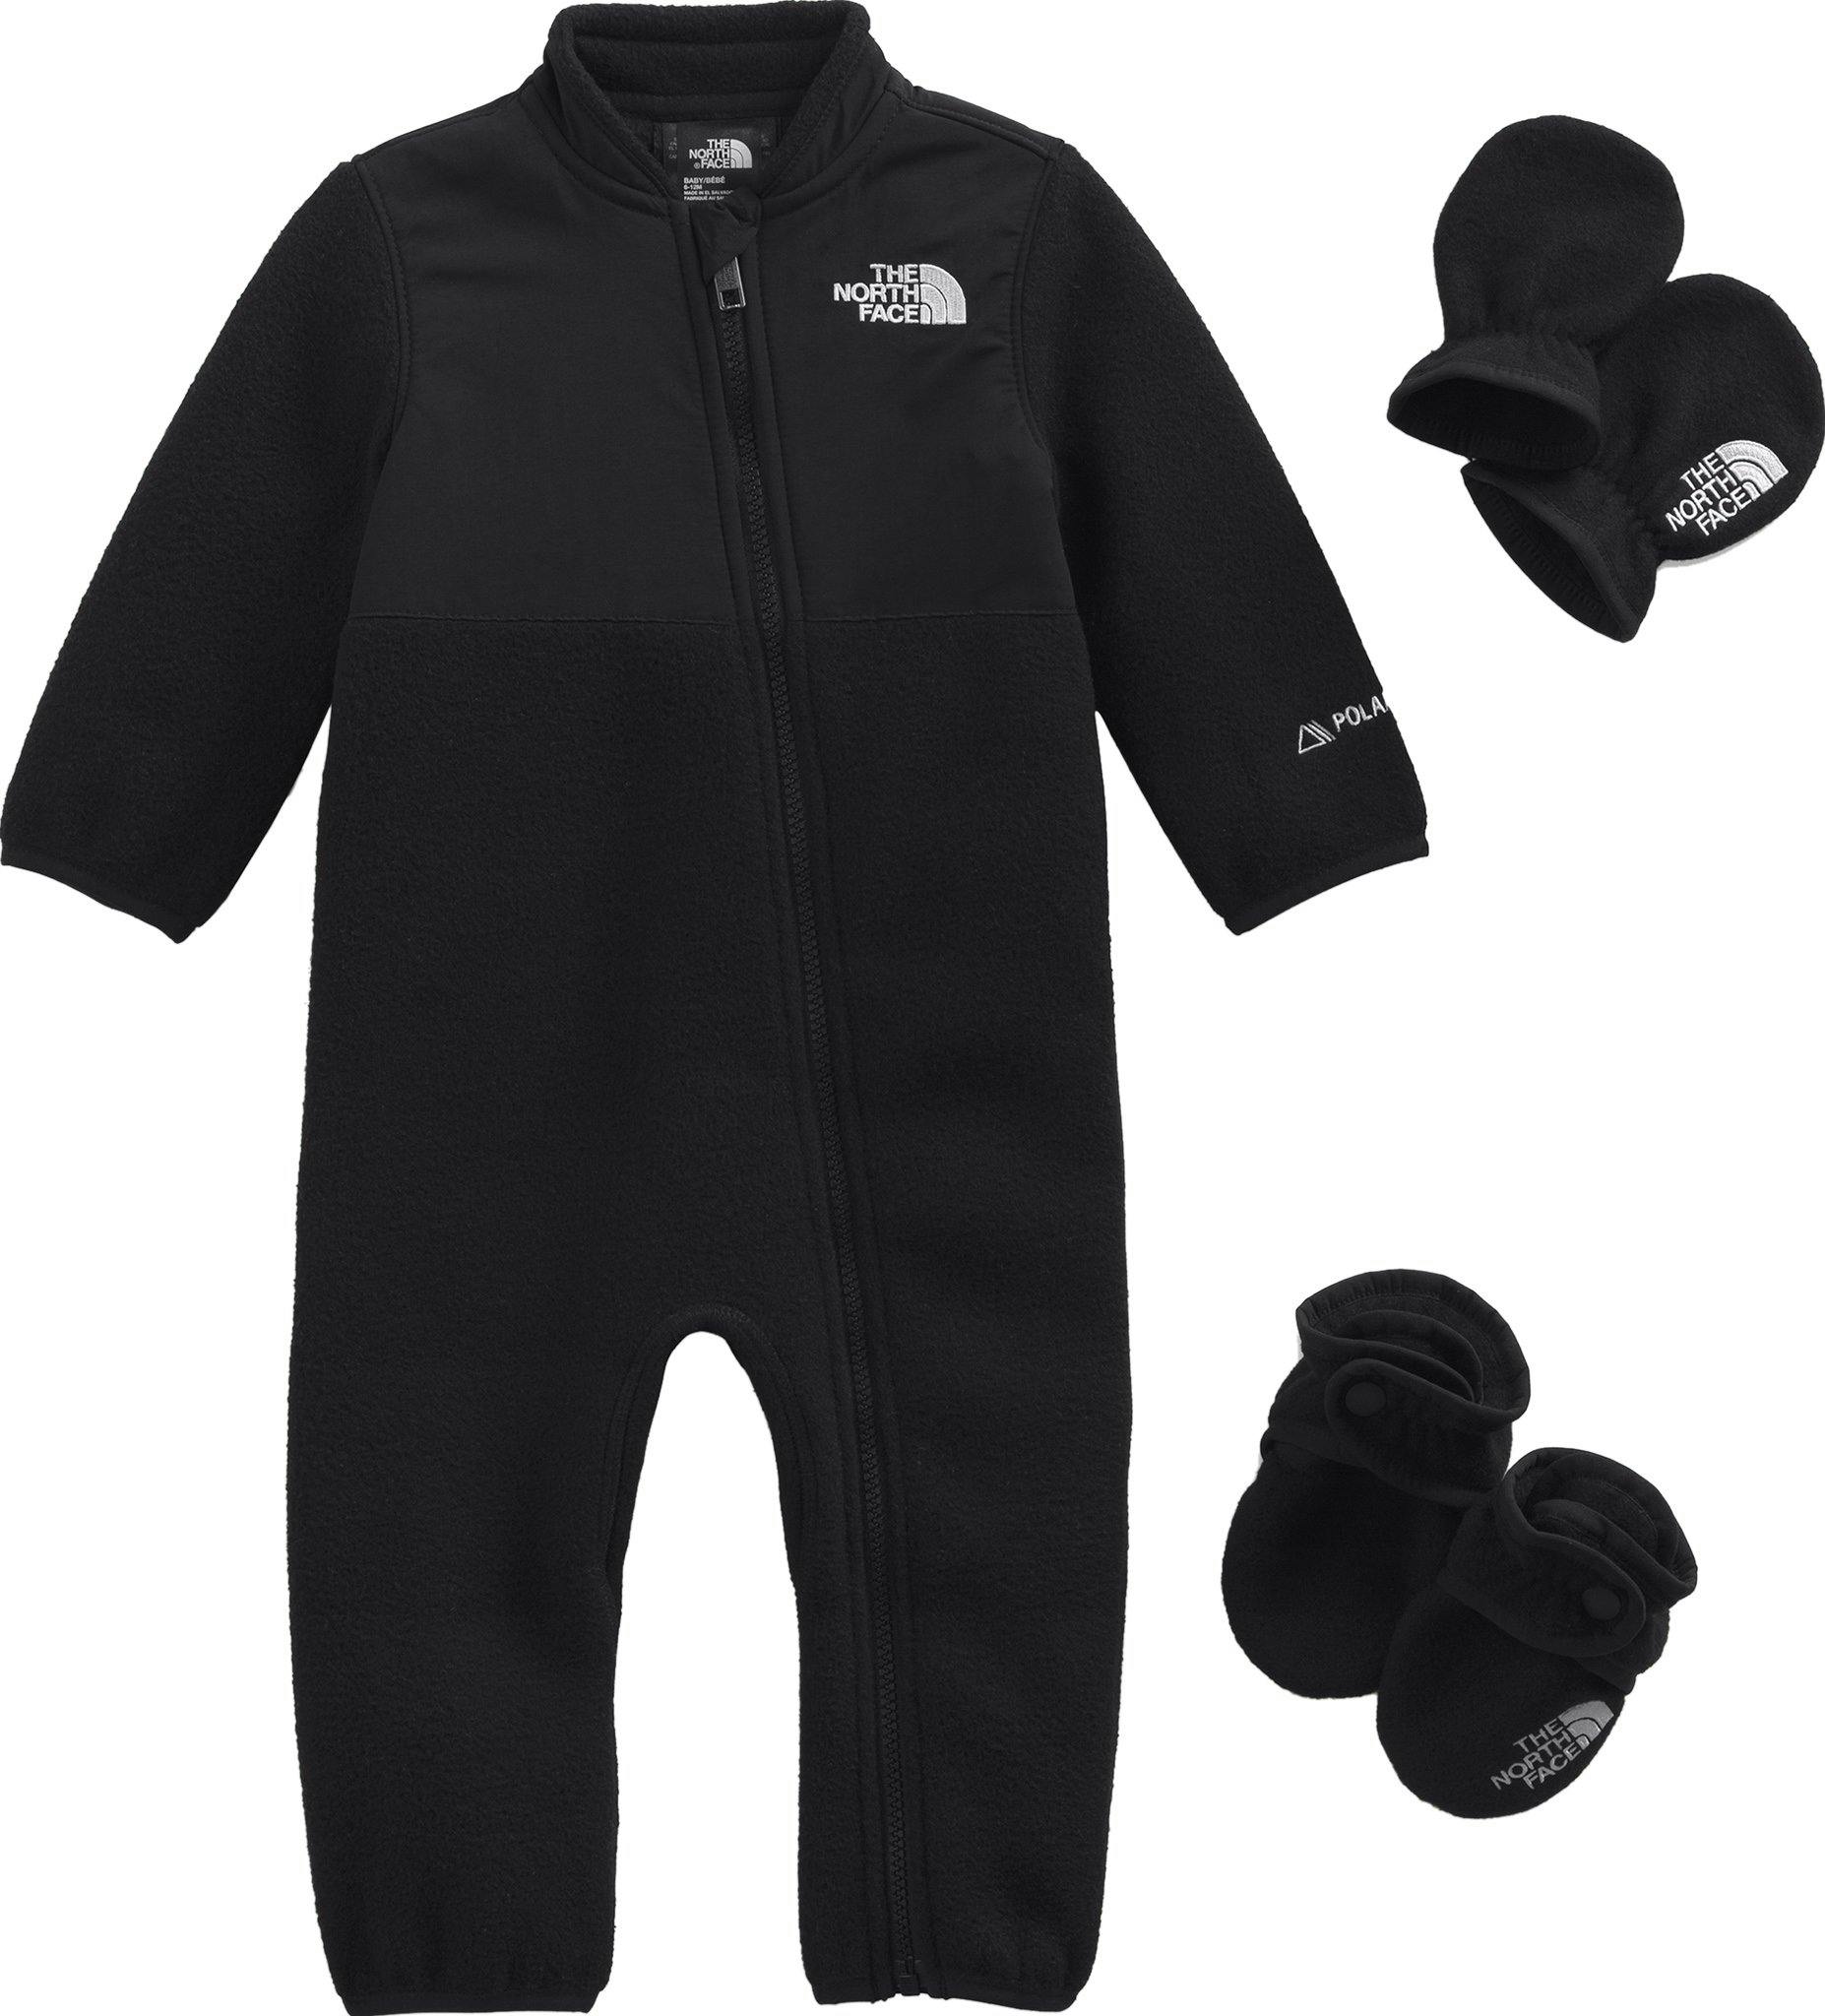 Product image for Denali One-Piece Set - Baby